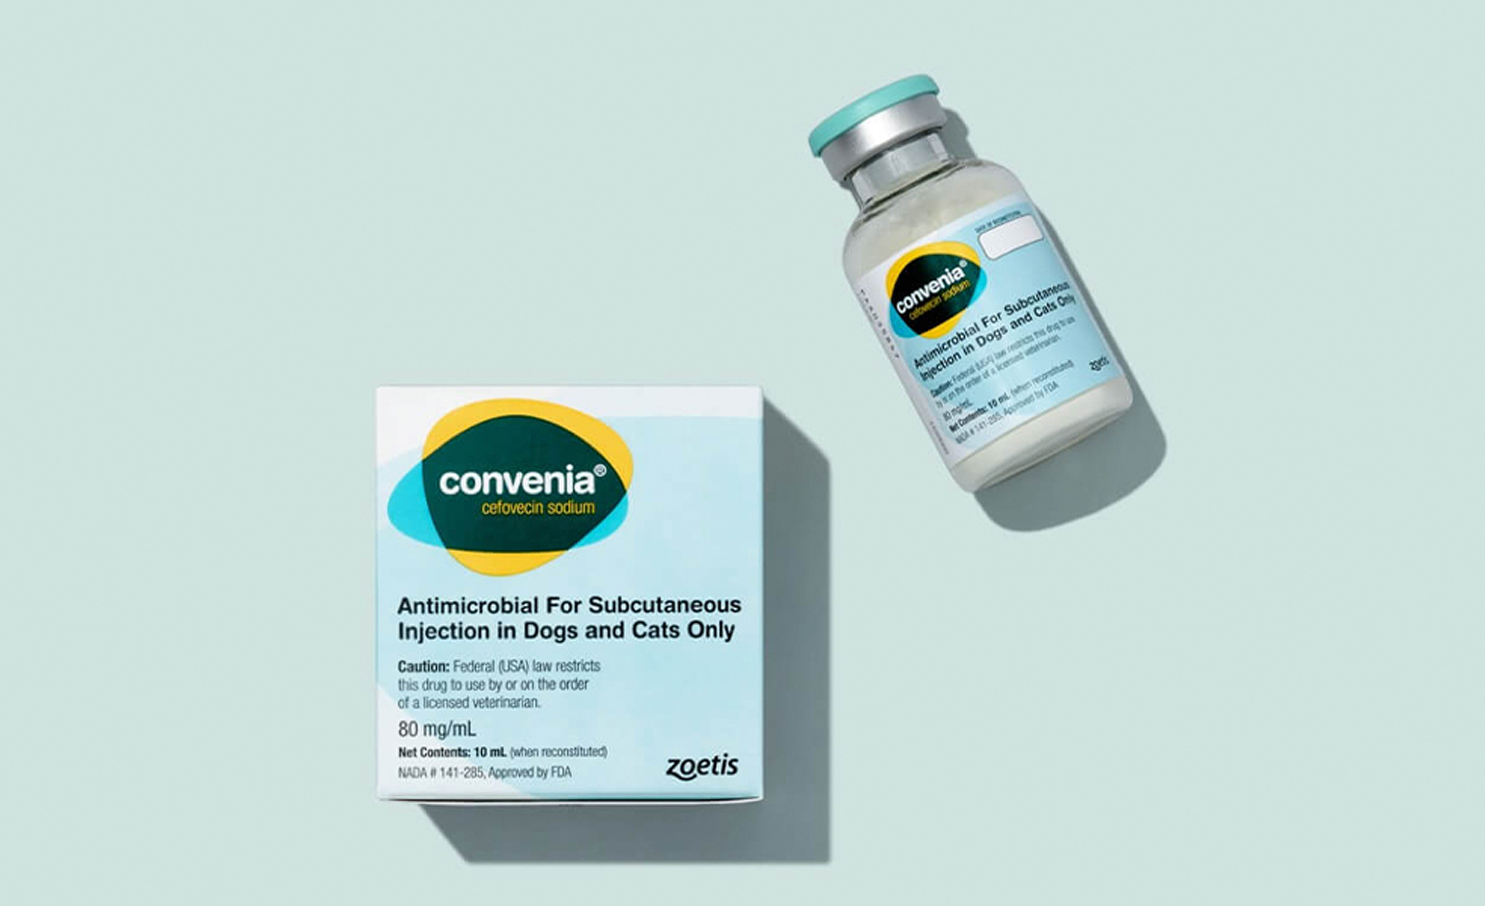 Convenia antimicrobial for dogs and cats - Zoetis